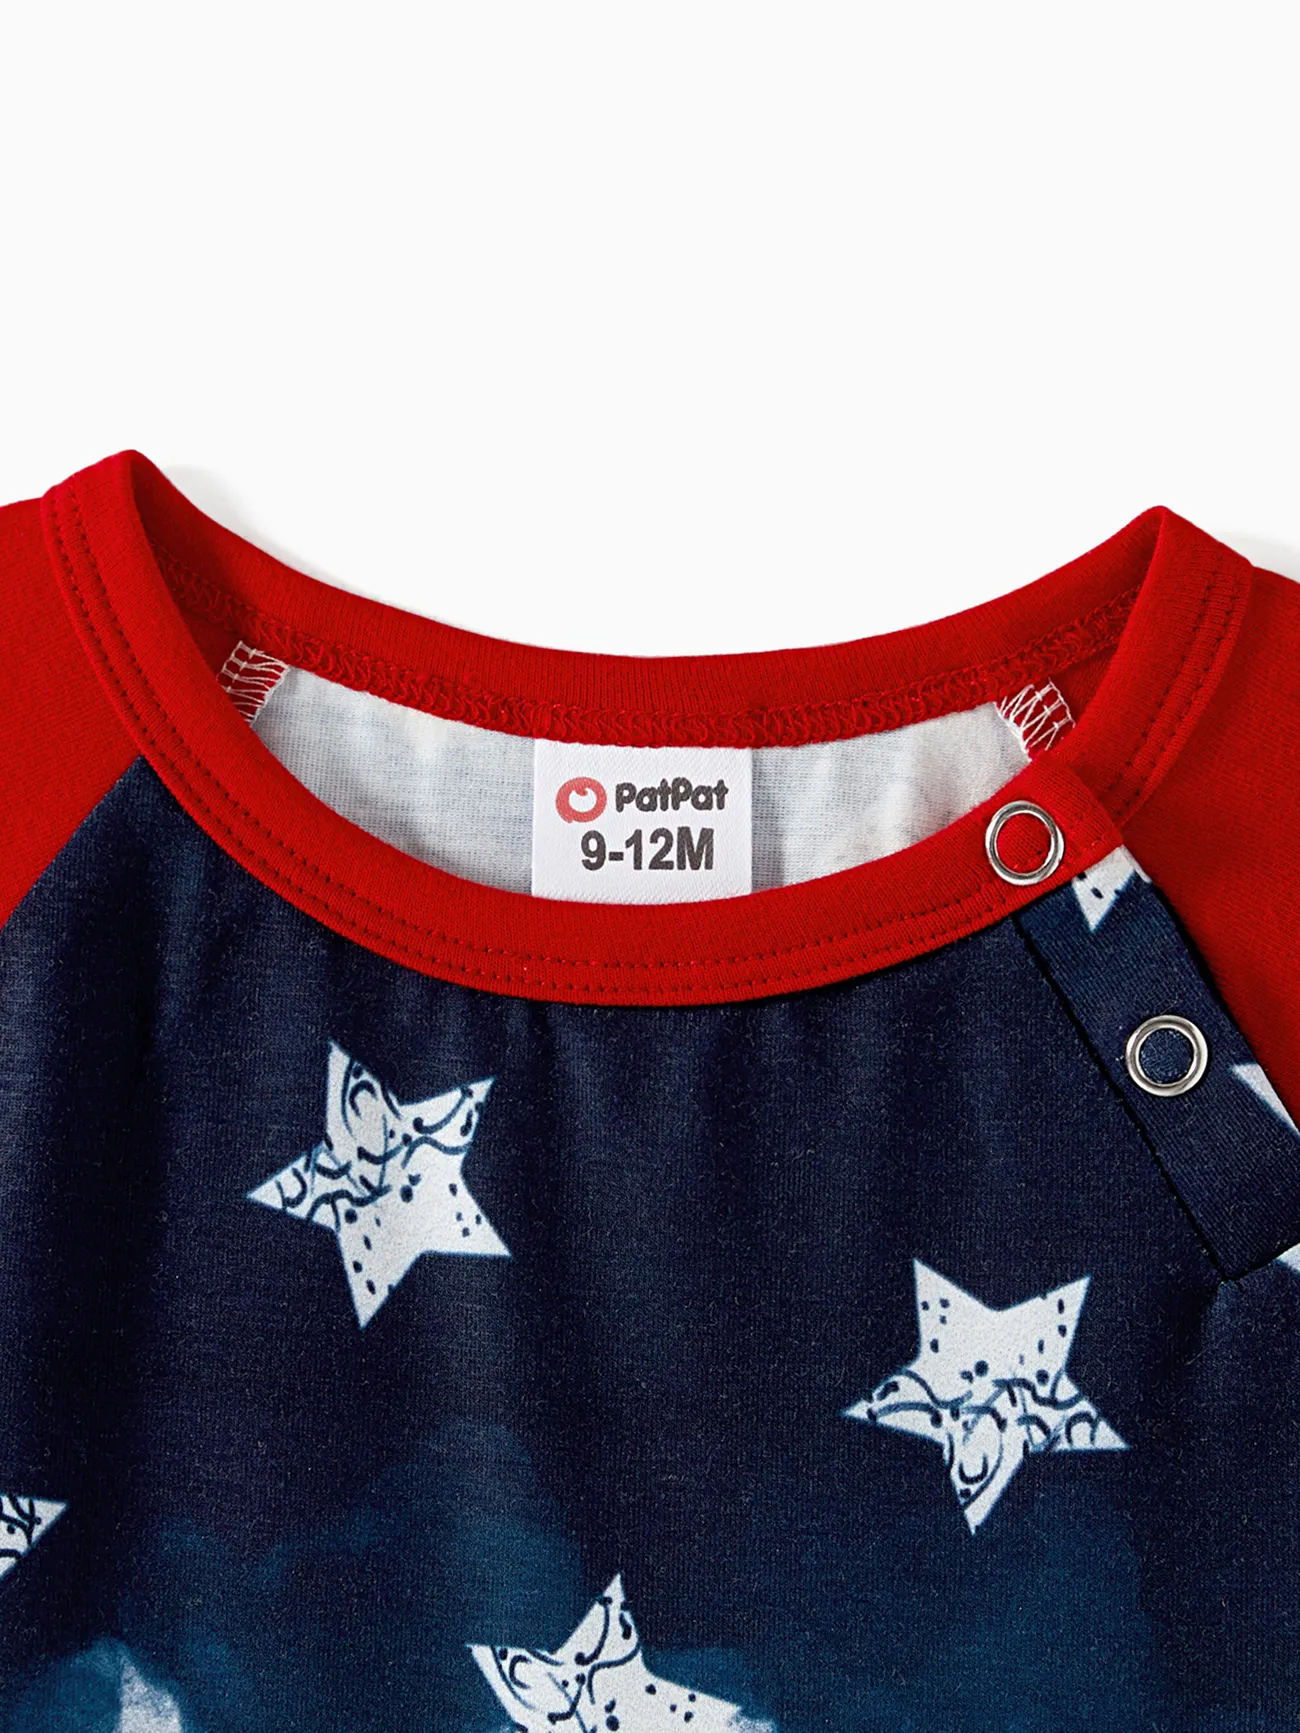 Independence Day Family Matching Allover Star Print Naia™ Cami Dresses and T-shirts Sets REDWHITE big image 1